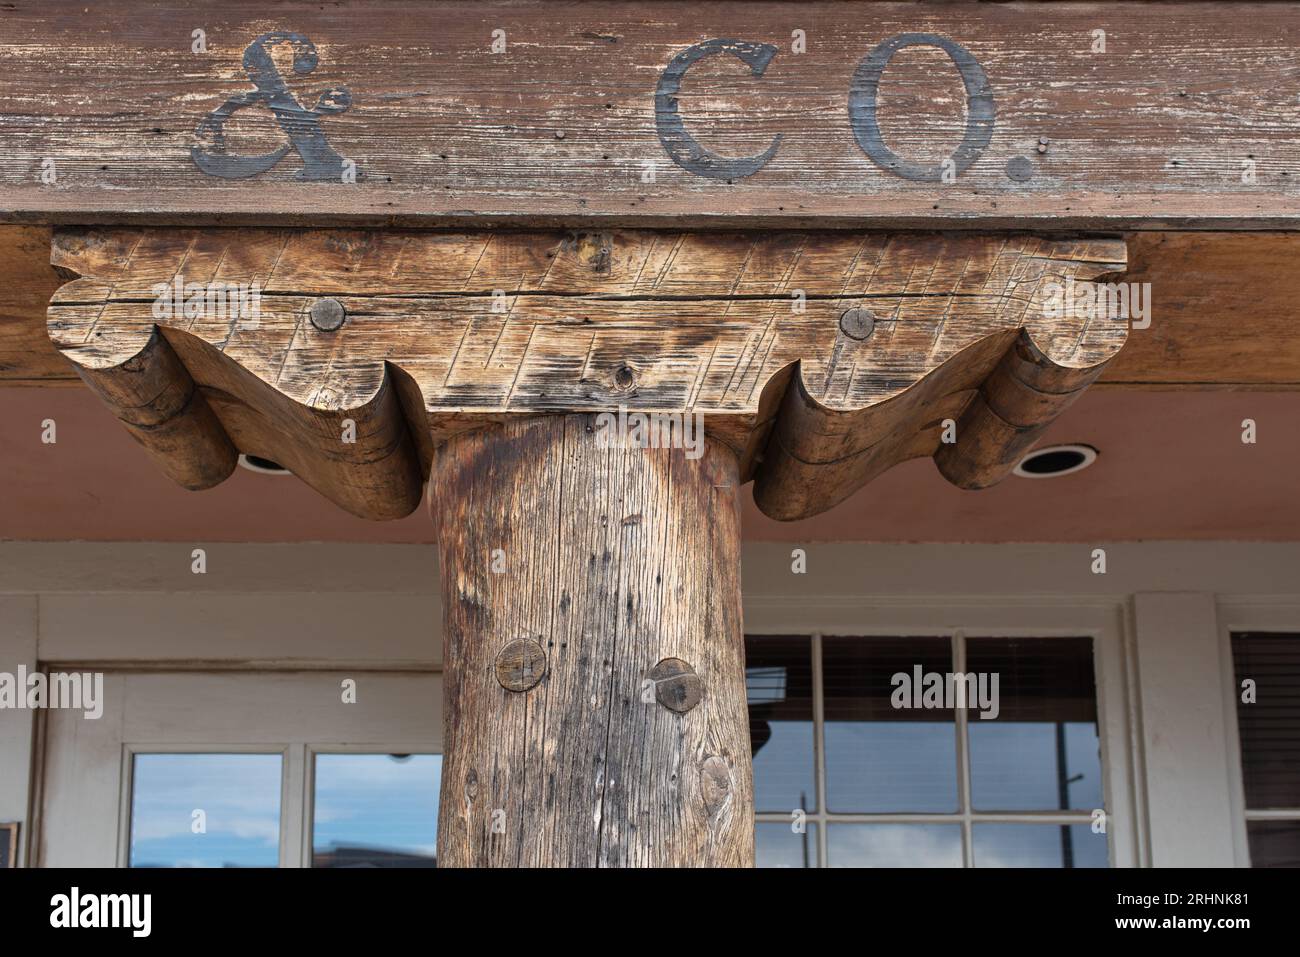 An old corbel, probably hand cut, helps distribute the weight of a heavy beam, traditional architecture in Santa Fe, New Mexico, USA. Stock Photo